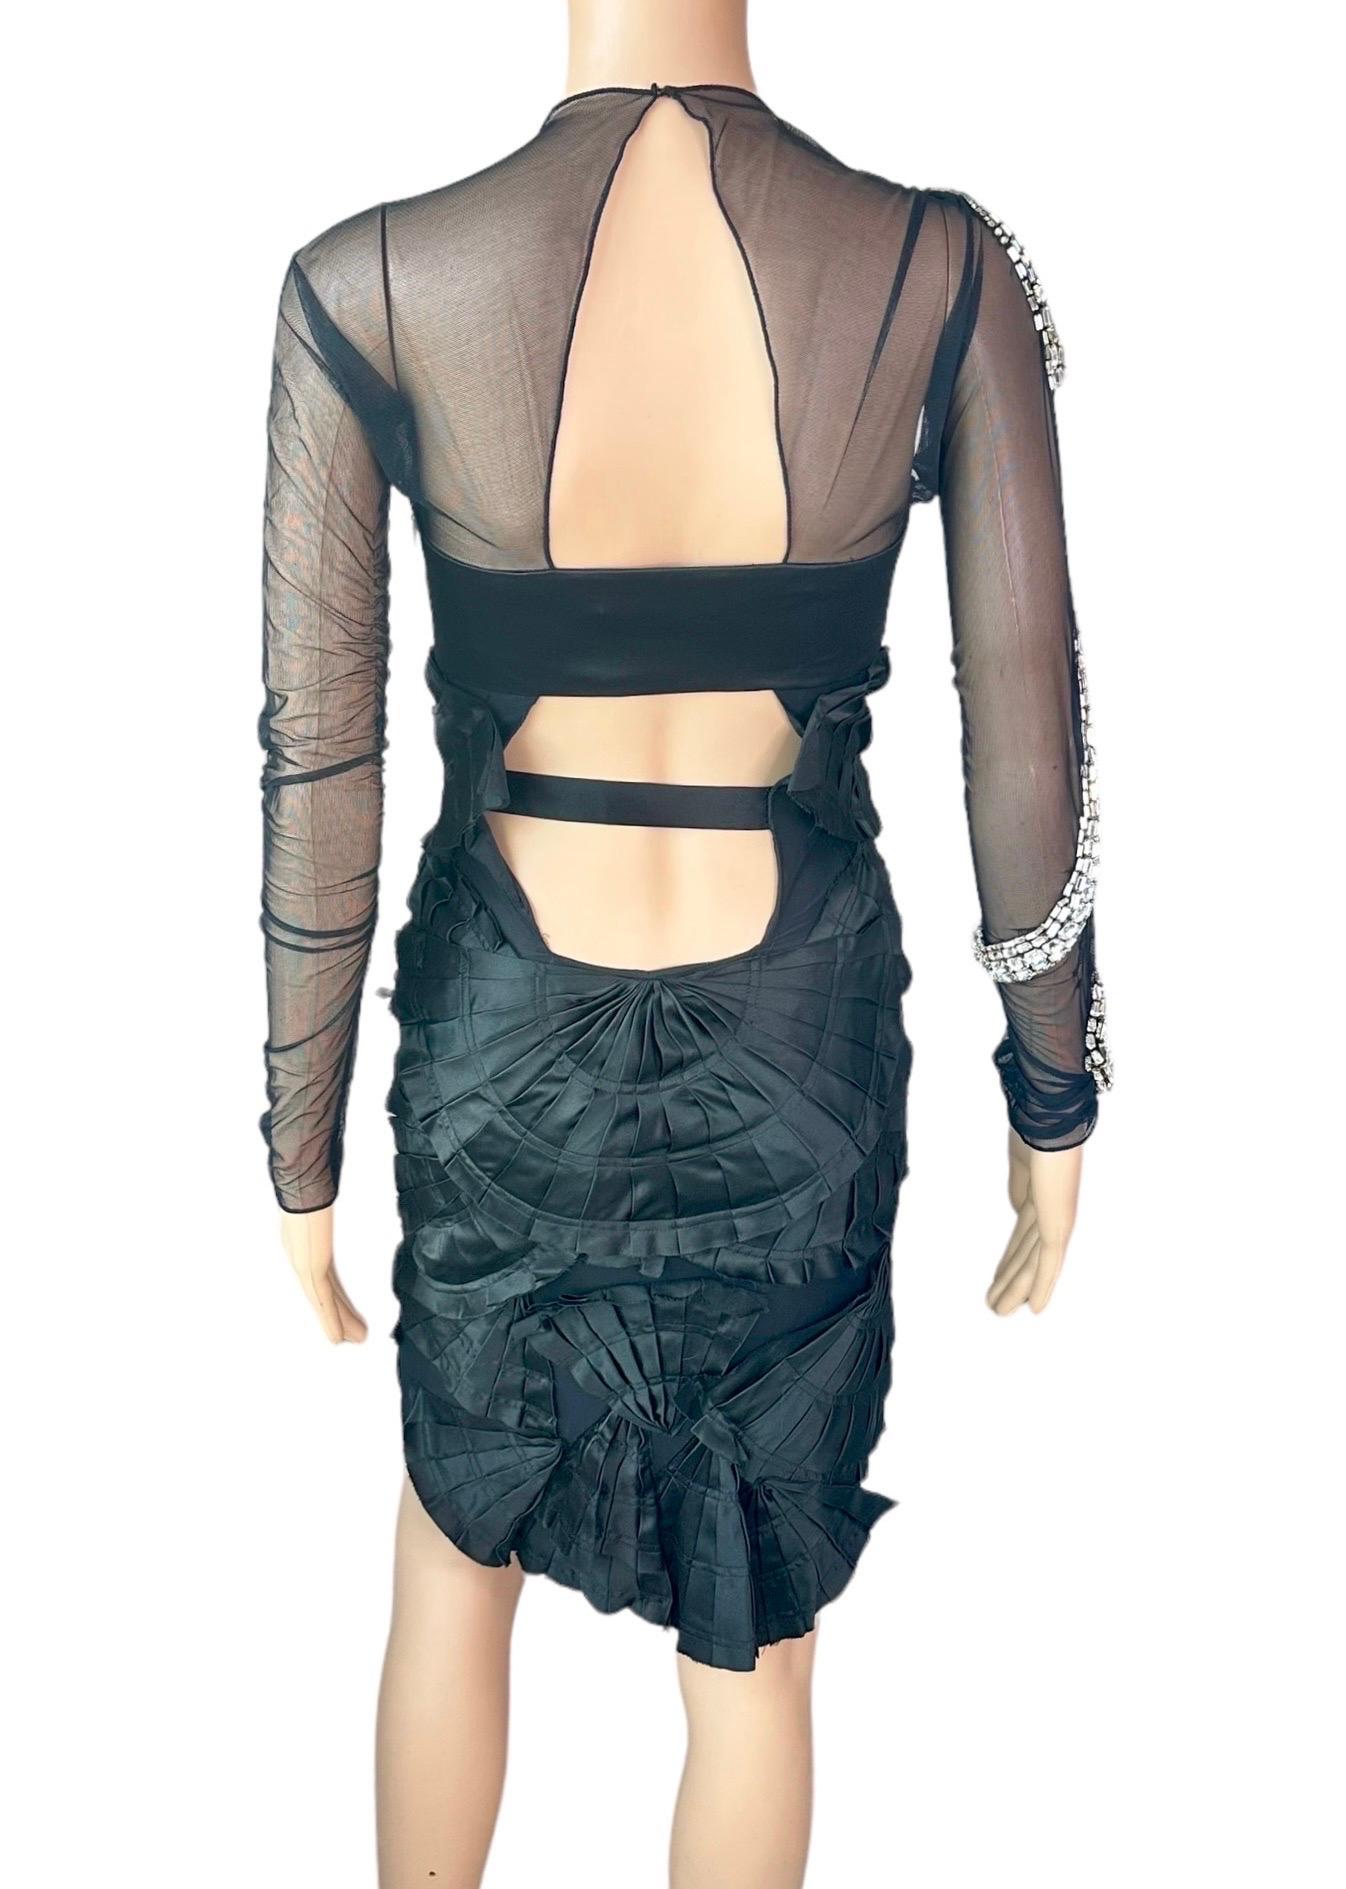 Tom Ford for Gucci S/S 2004 Runway Embellished Snake Sheer Cutout Black Dress For Sale 2